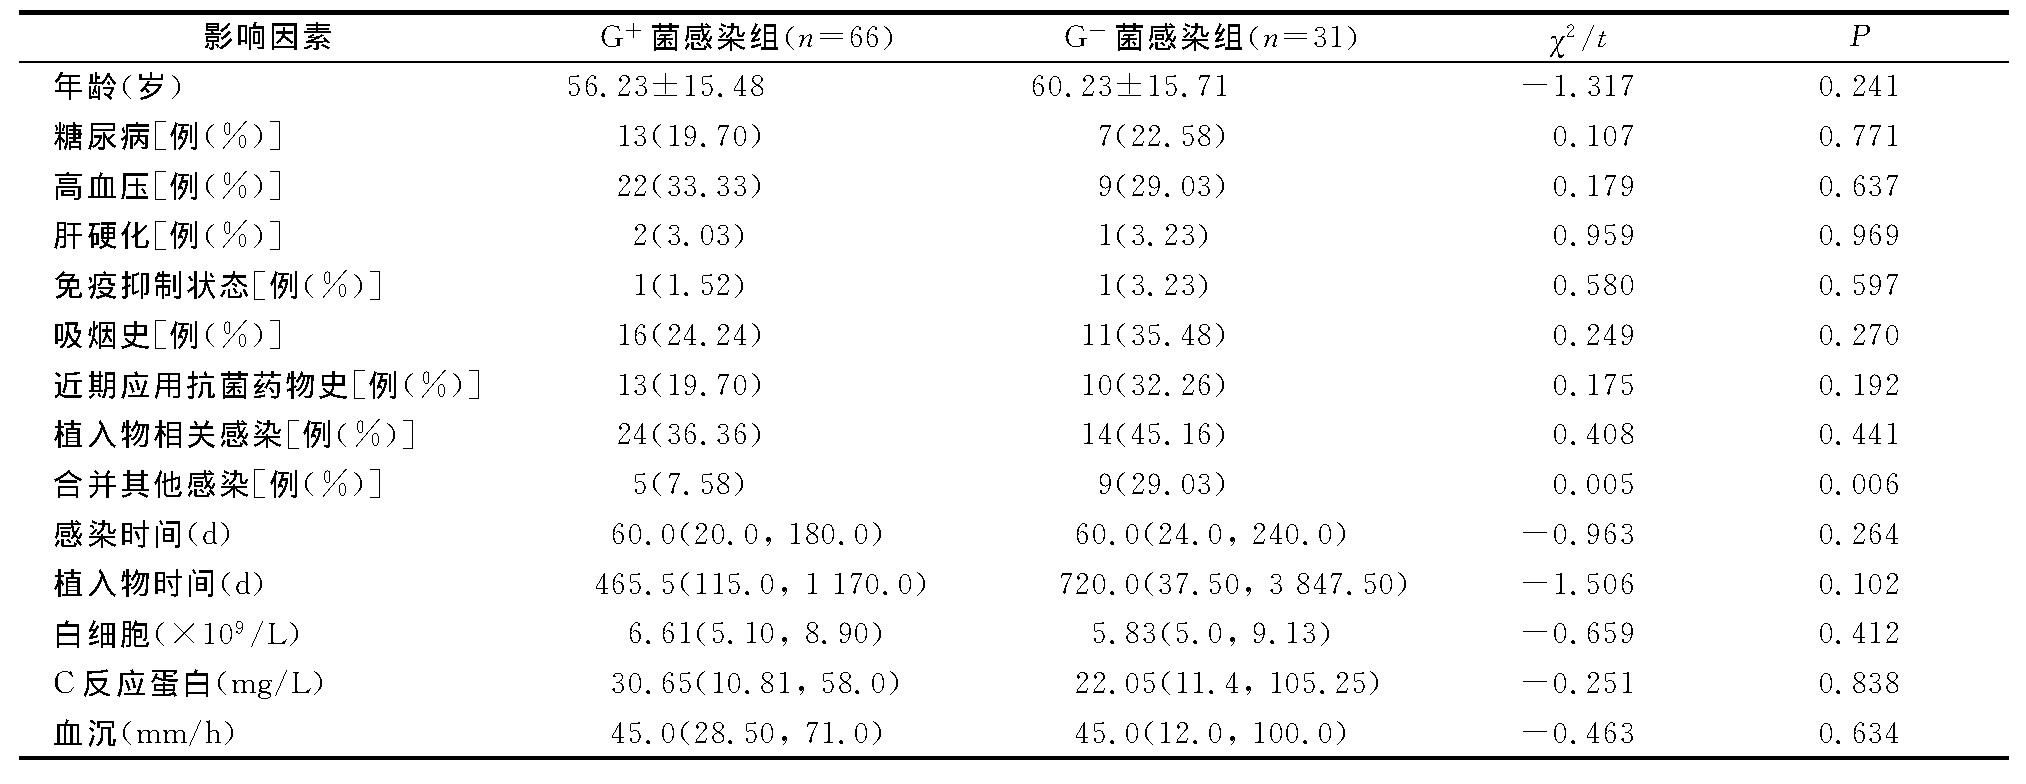 4 ǹؽڲͬϸȾصĵطTable 4 Univariate analysis on related factors for osteoarticular infection with different types of bacteria